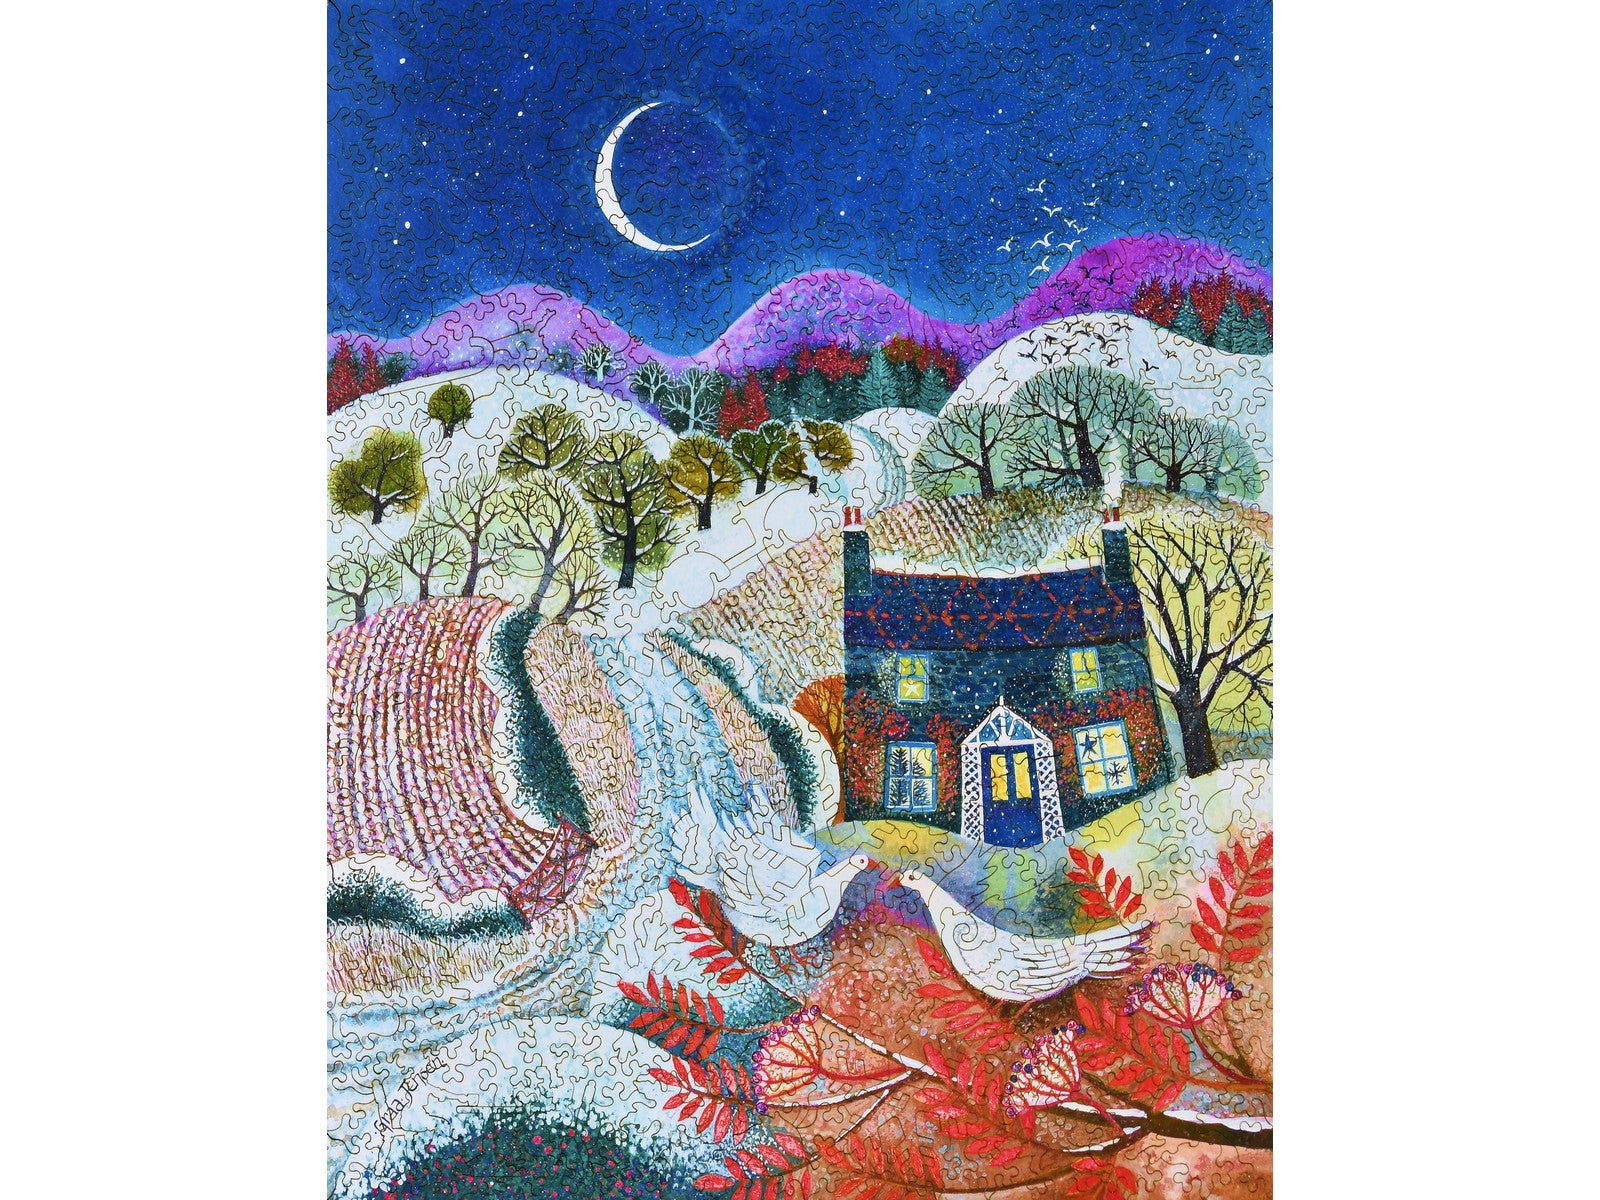 The front of the puzzle, Snowbirds, which shows some birds next to a snowy cottage and farm.